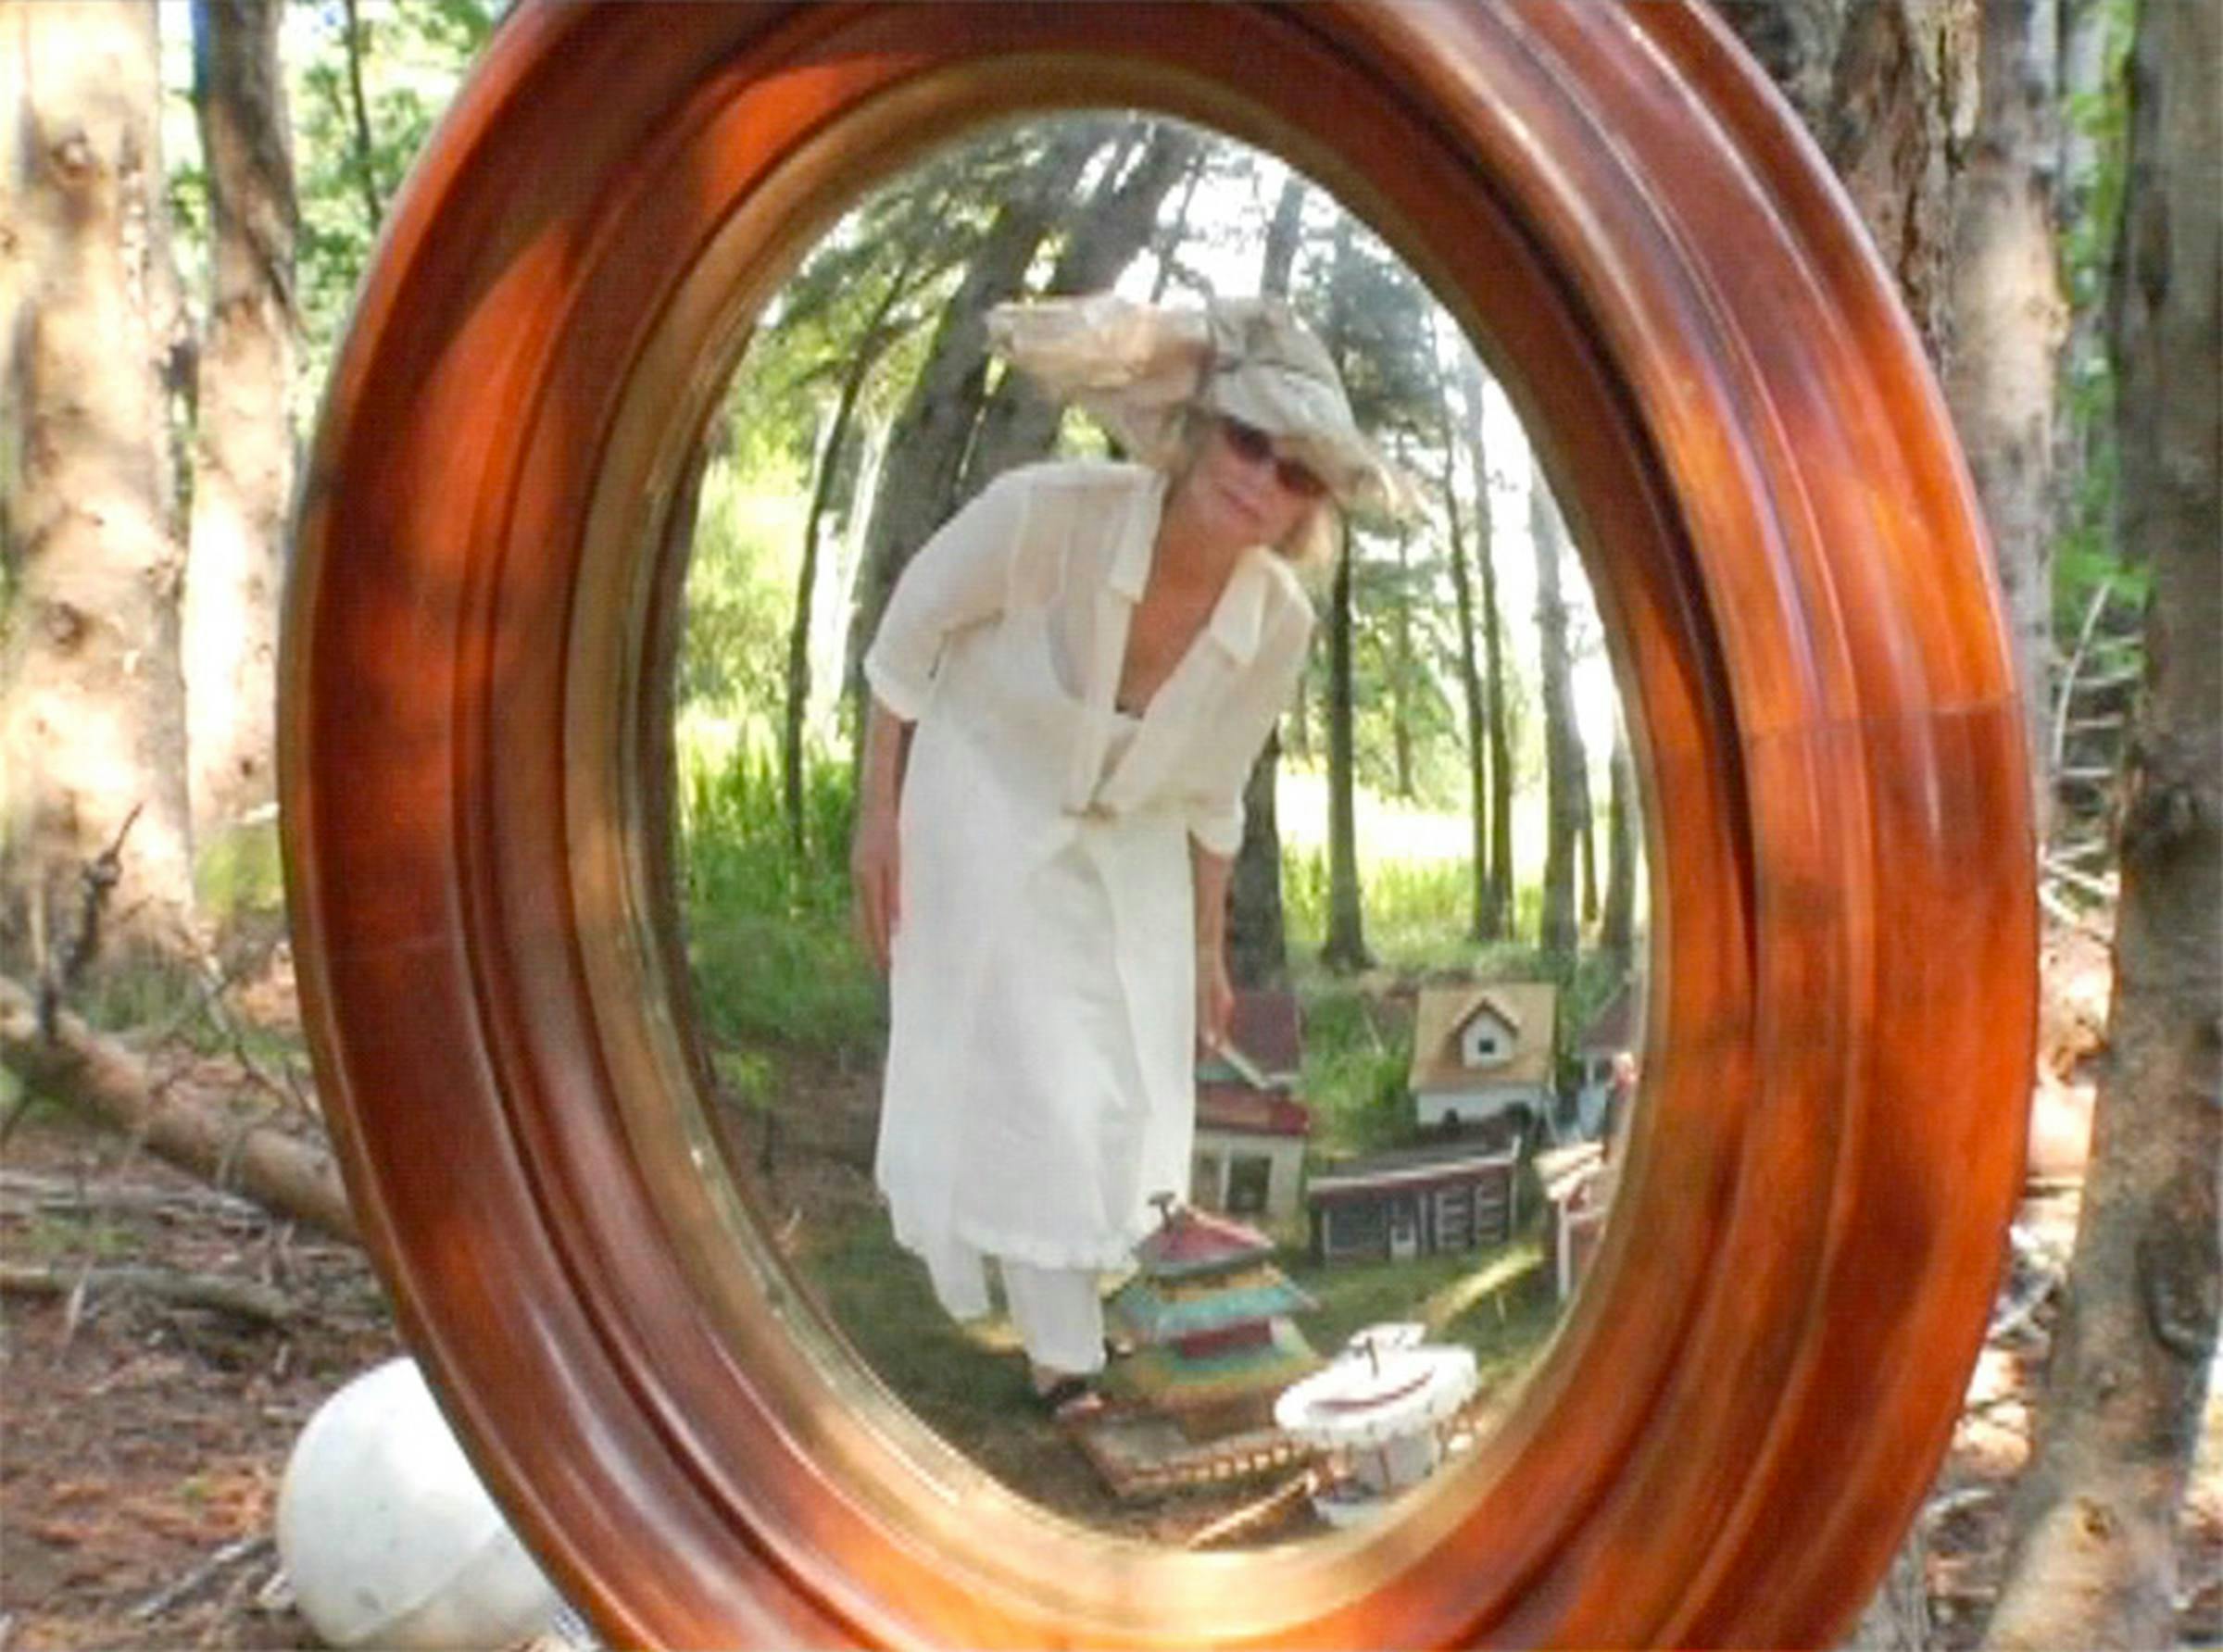 An image of the artist dressed in white and standing in a garden. She is wearing sunglasses. She is peering through a wooden window at us